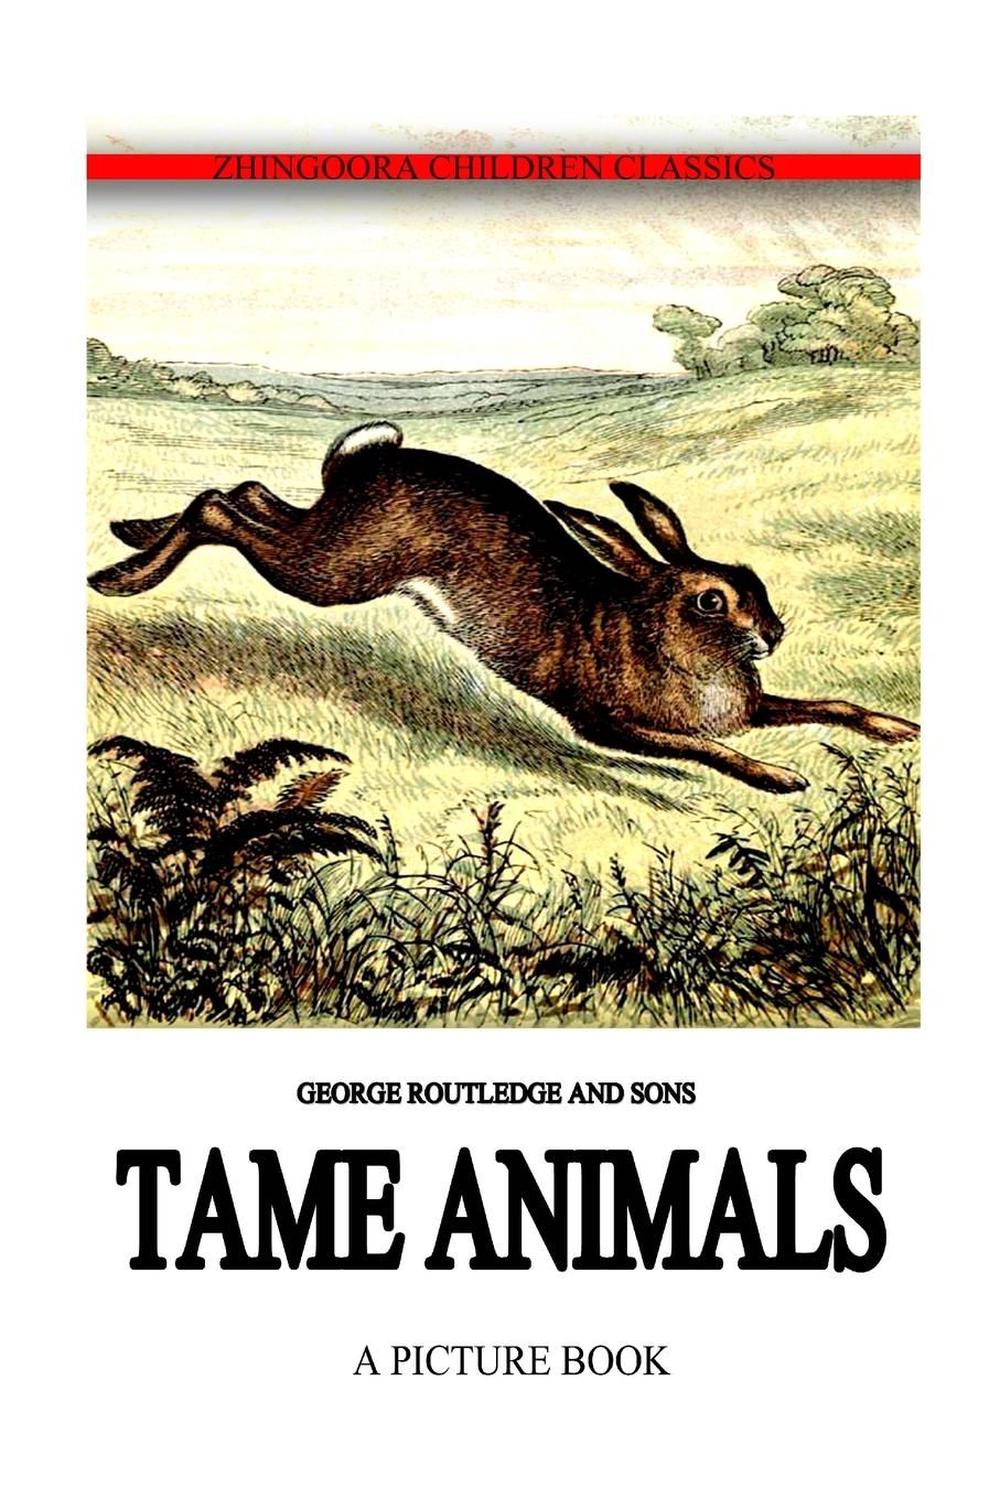 Tame Animals by George Routledge And Sons (English) Paperback Book Free